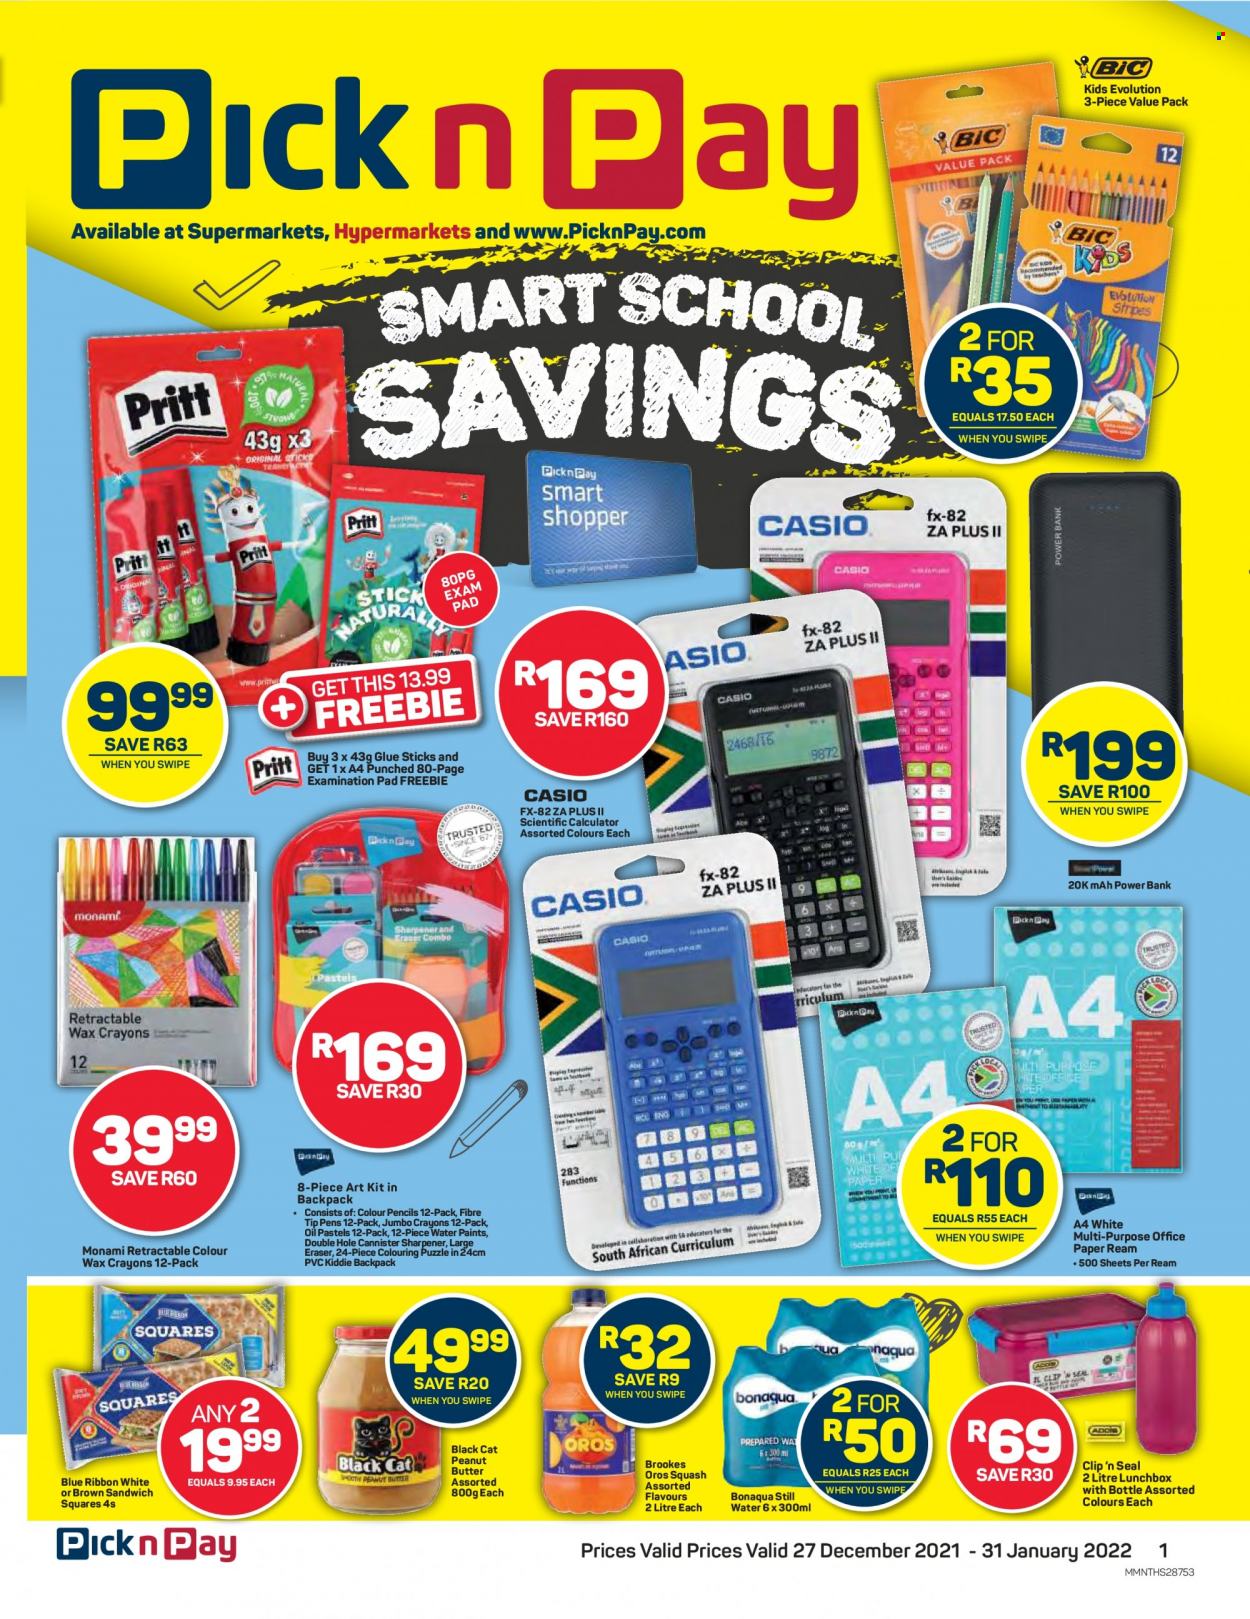 Pick n Pay specials - 12.27.2021 - 01.31.2022. 